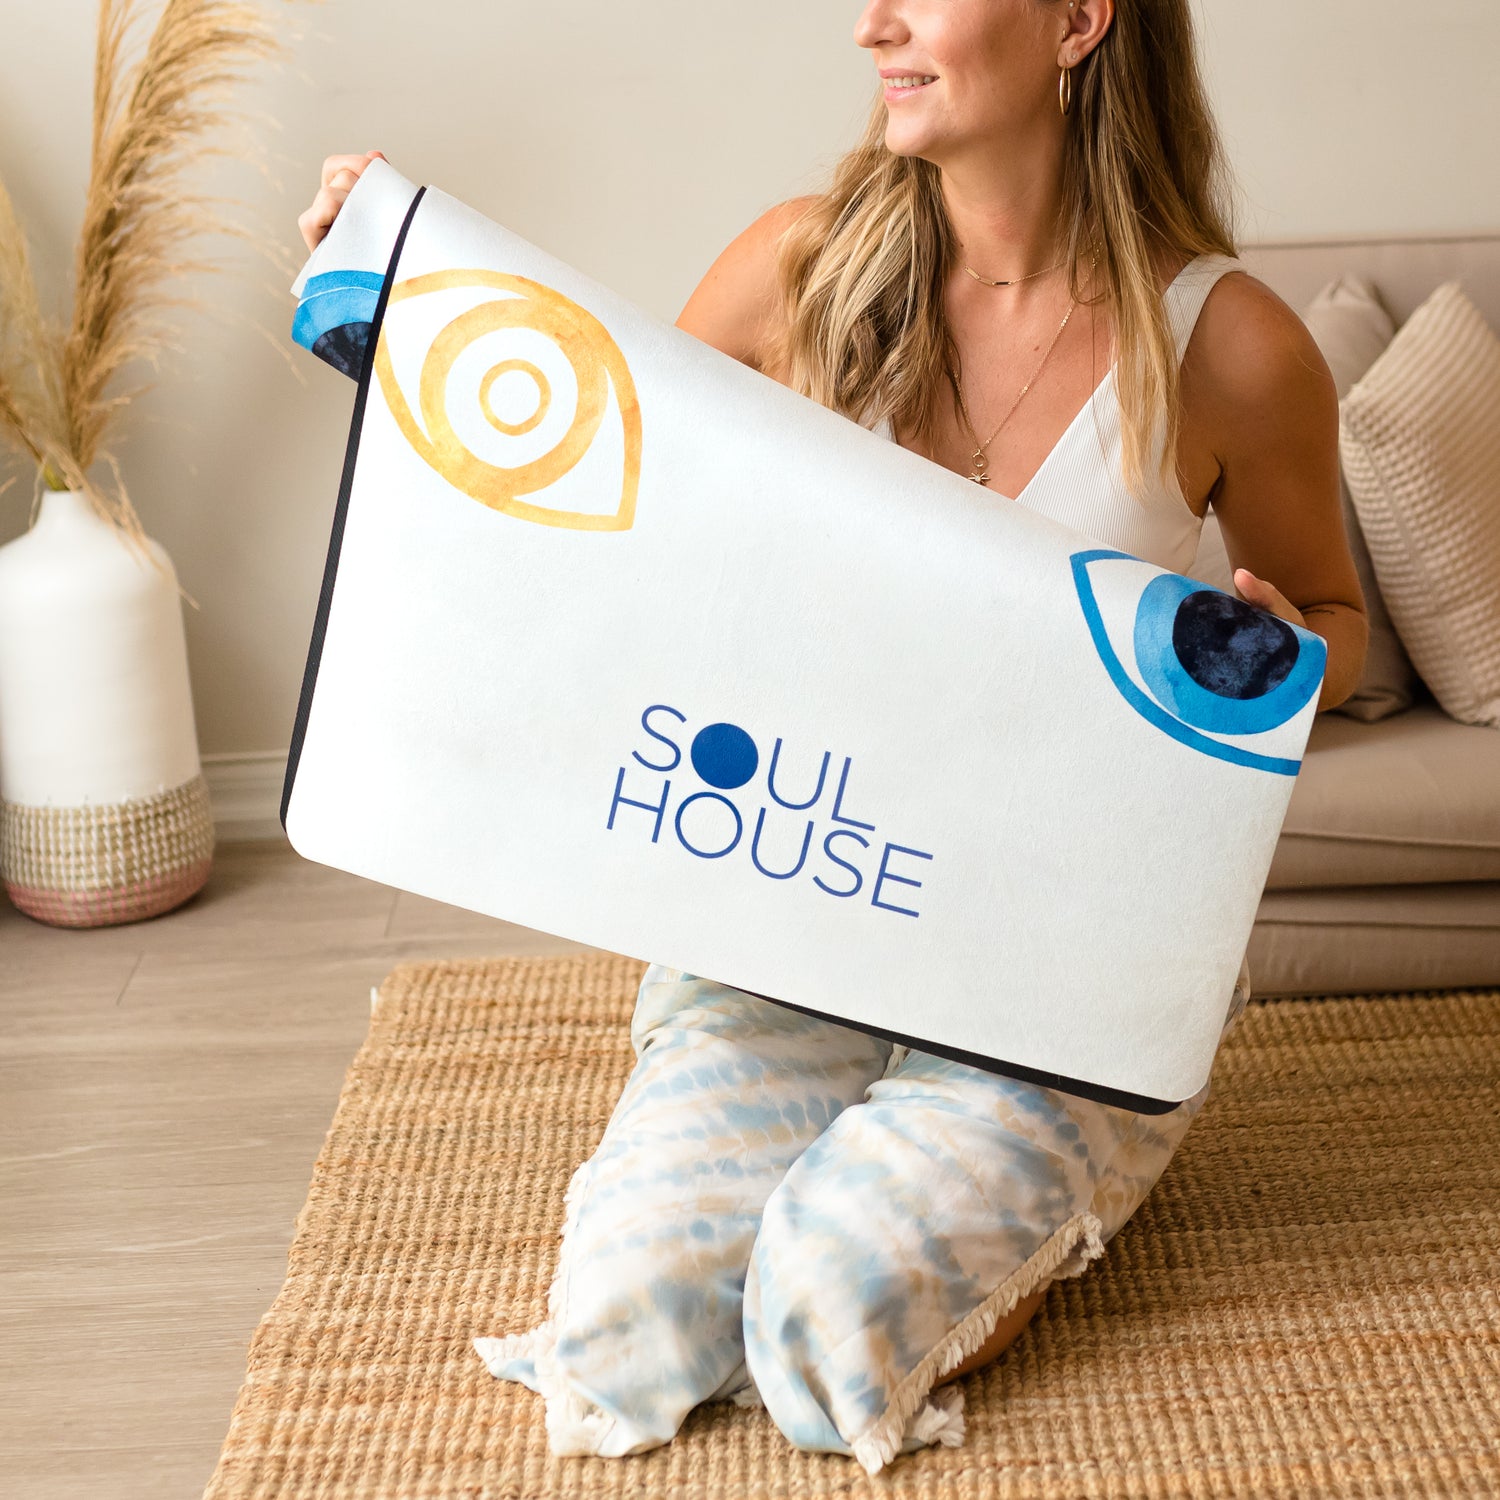 Lady holding microfiber suede yoga mat with blue and golden evil eye.